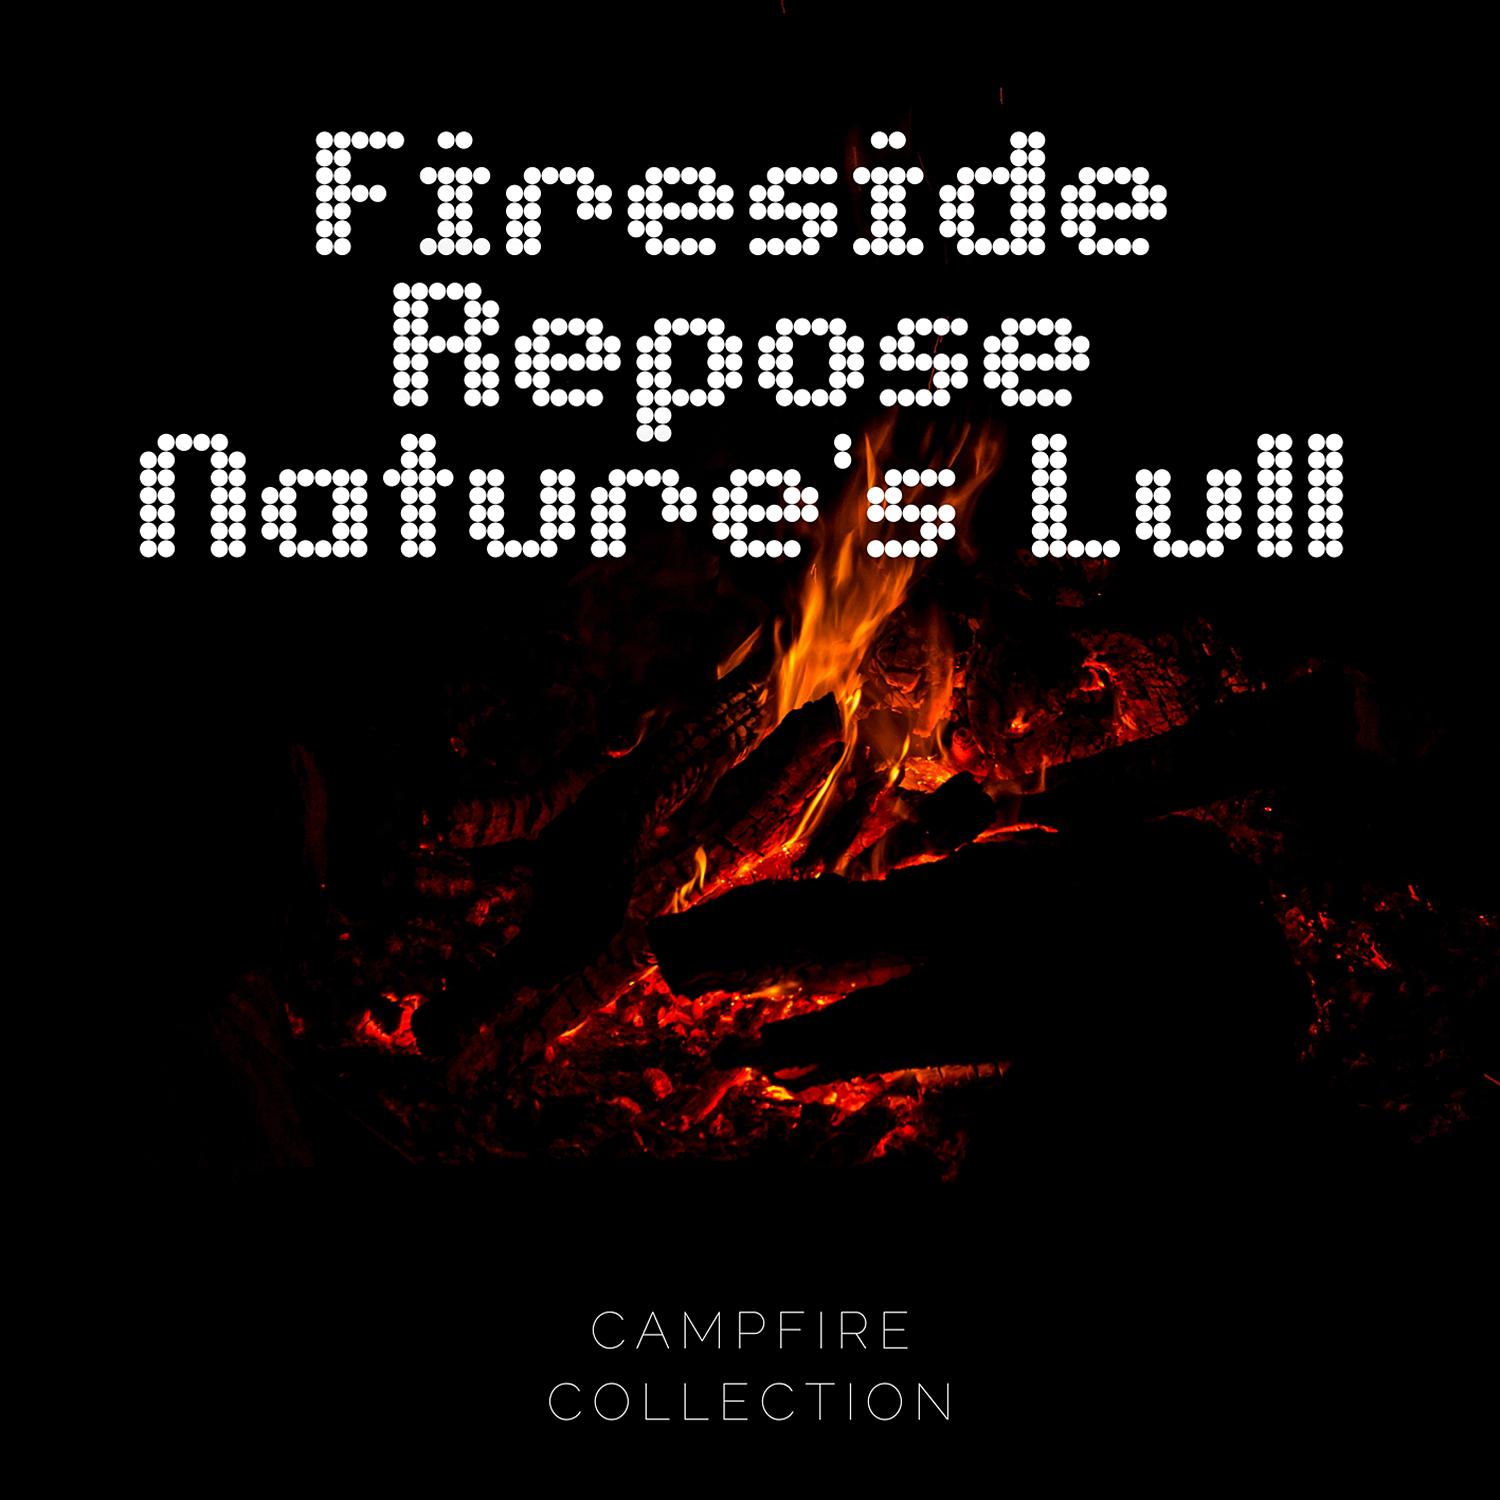 Campfire Collection - Warm Ember Glowing